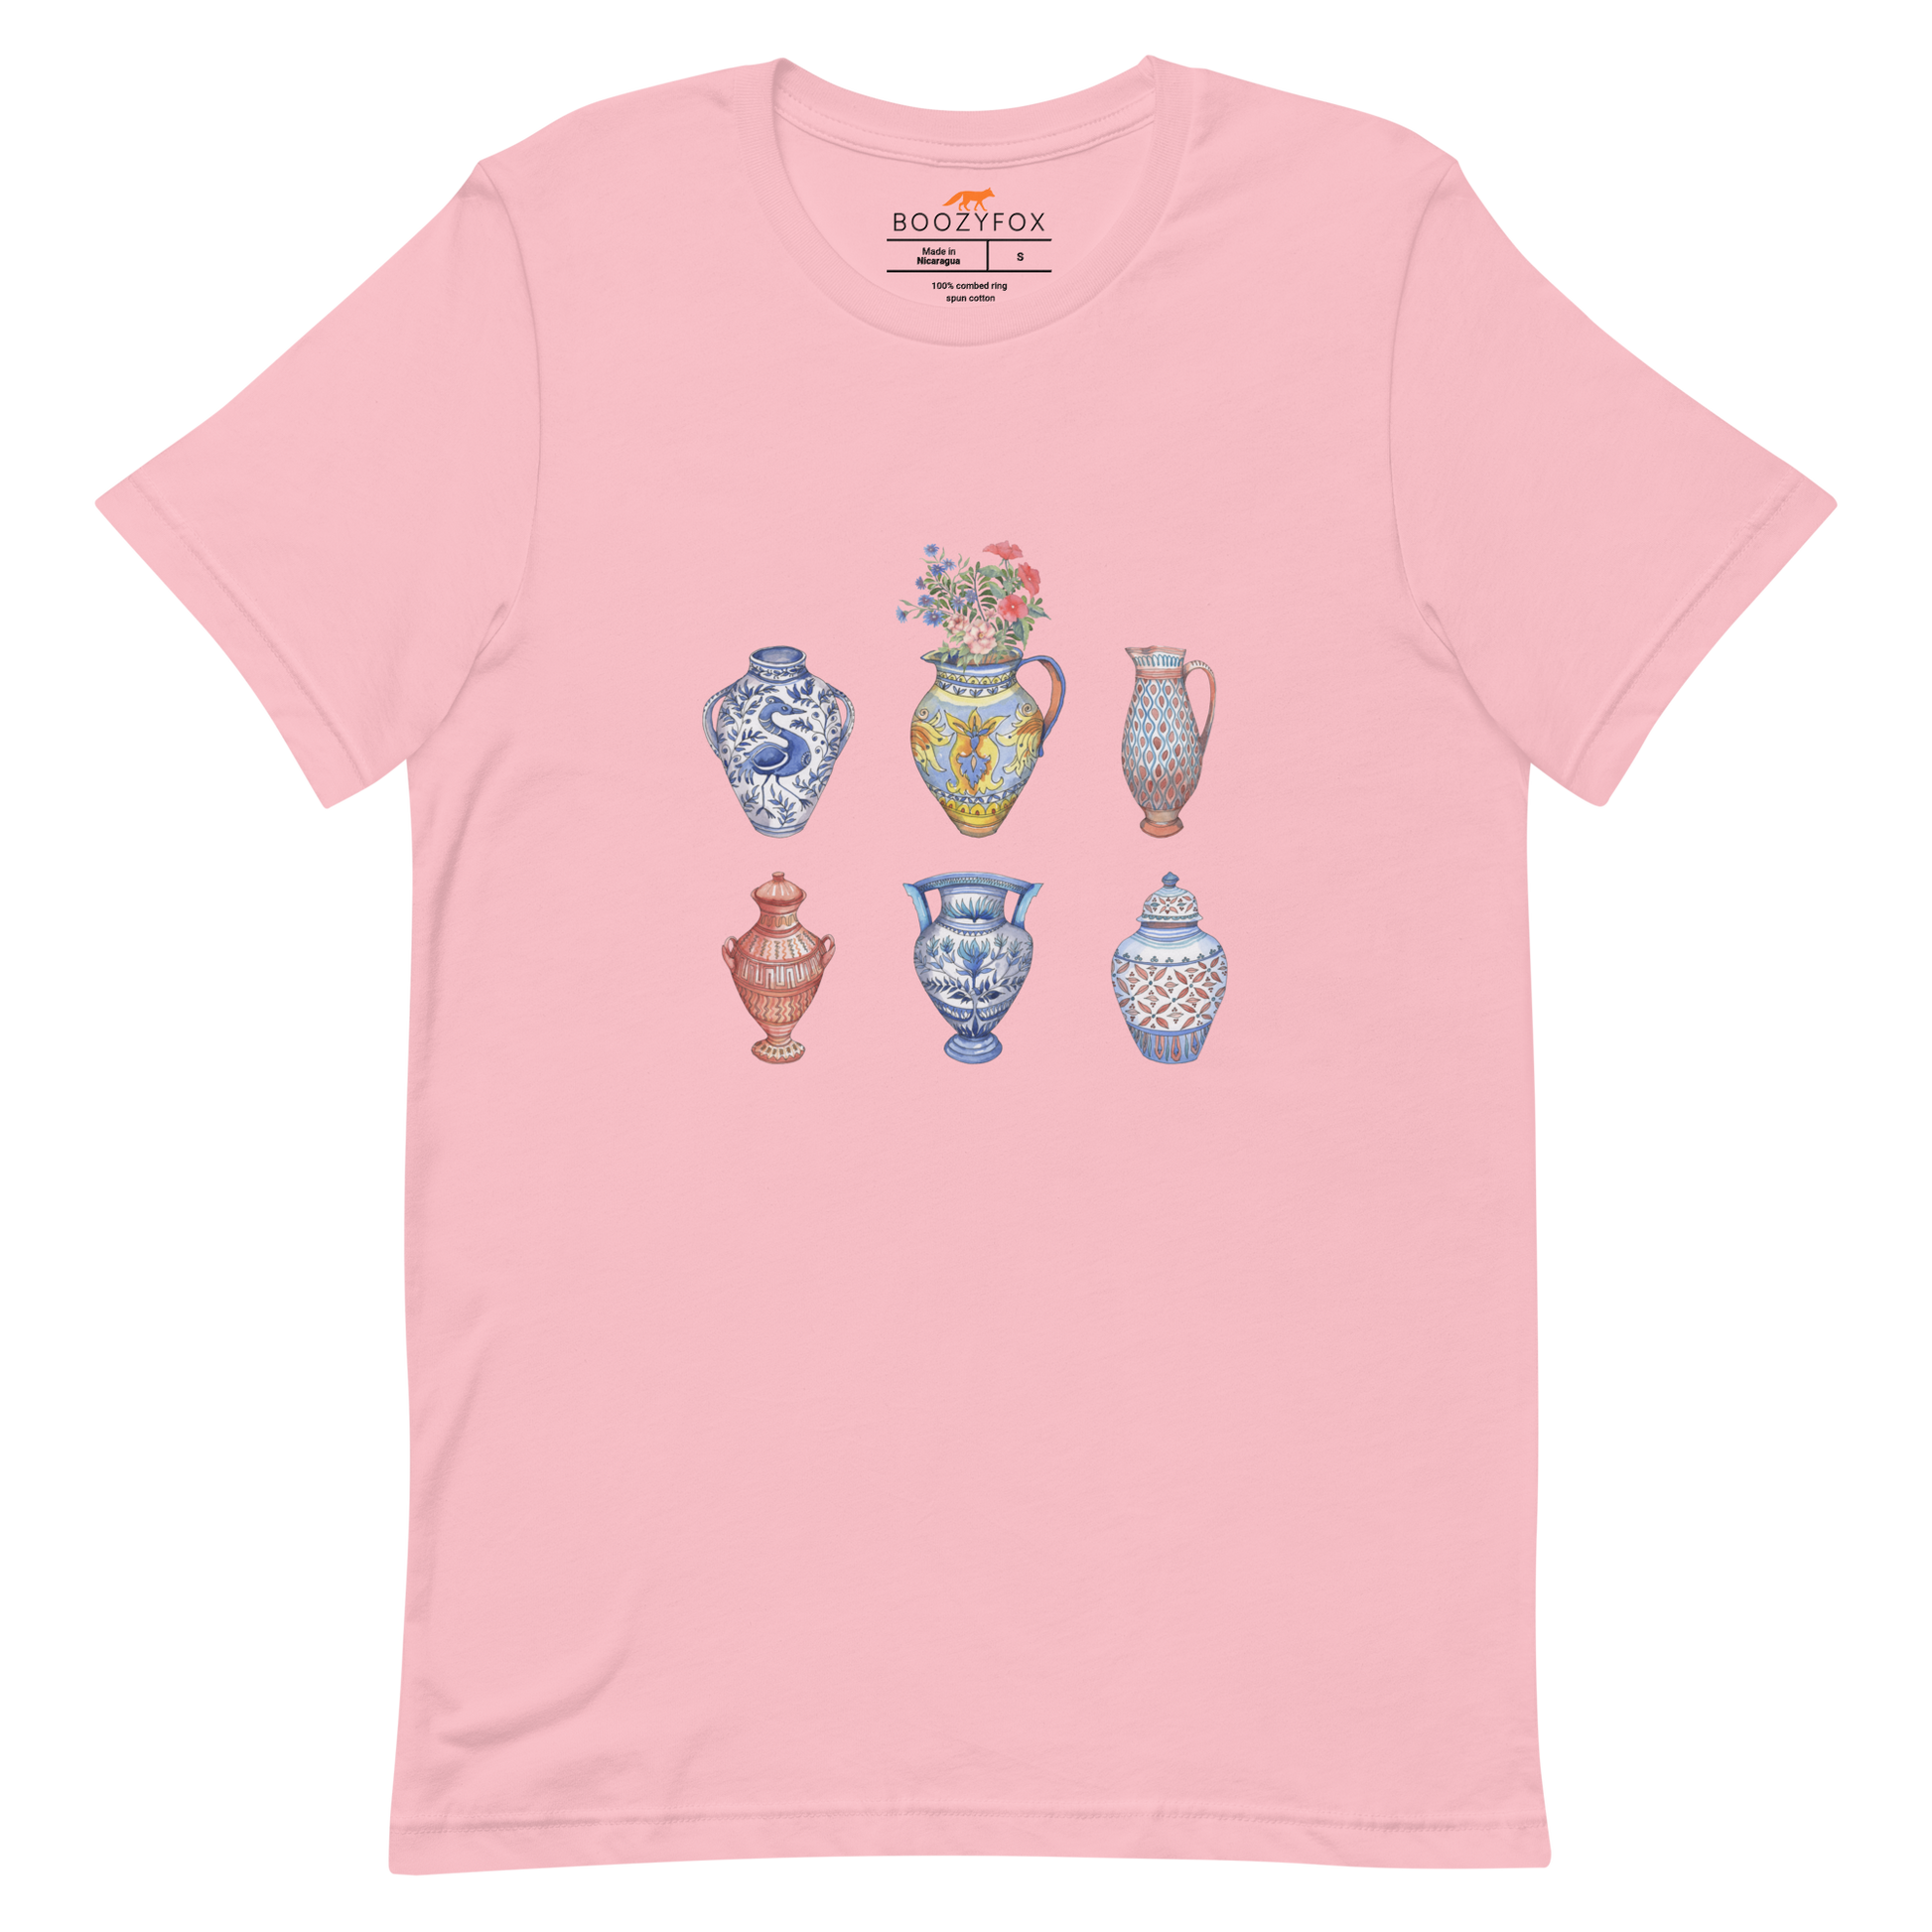 Pink Premium Vase Tee featuring a chic vase graphic on the chest - Artsy Graphic Vase Tees - Boozy Fox